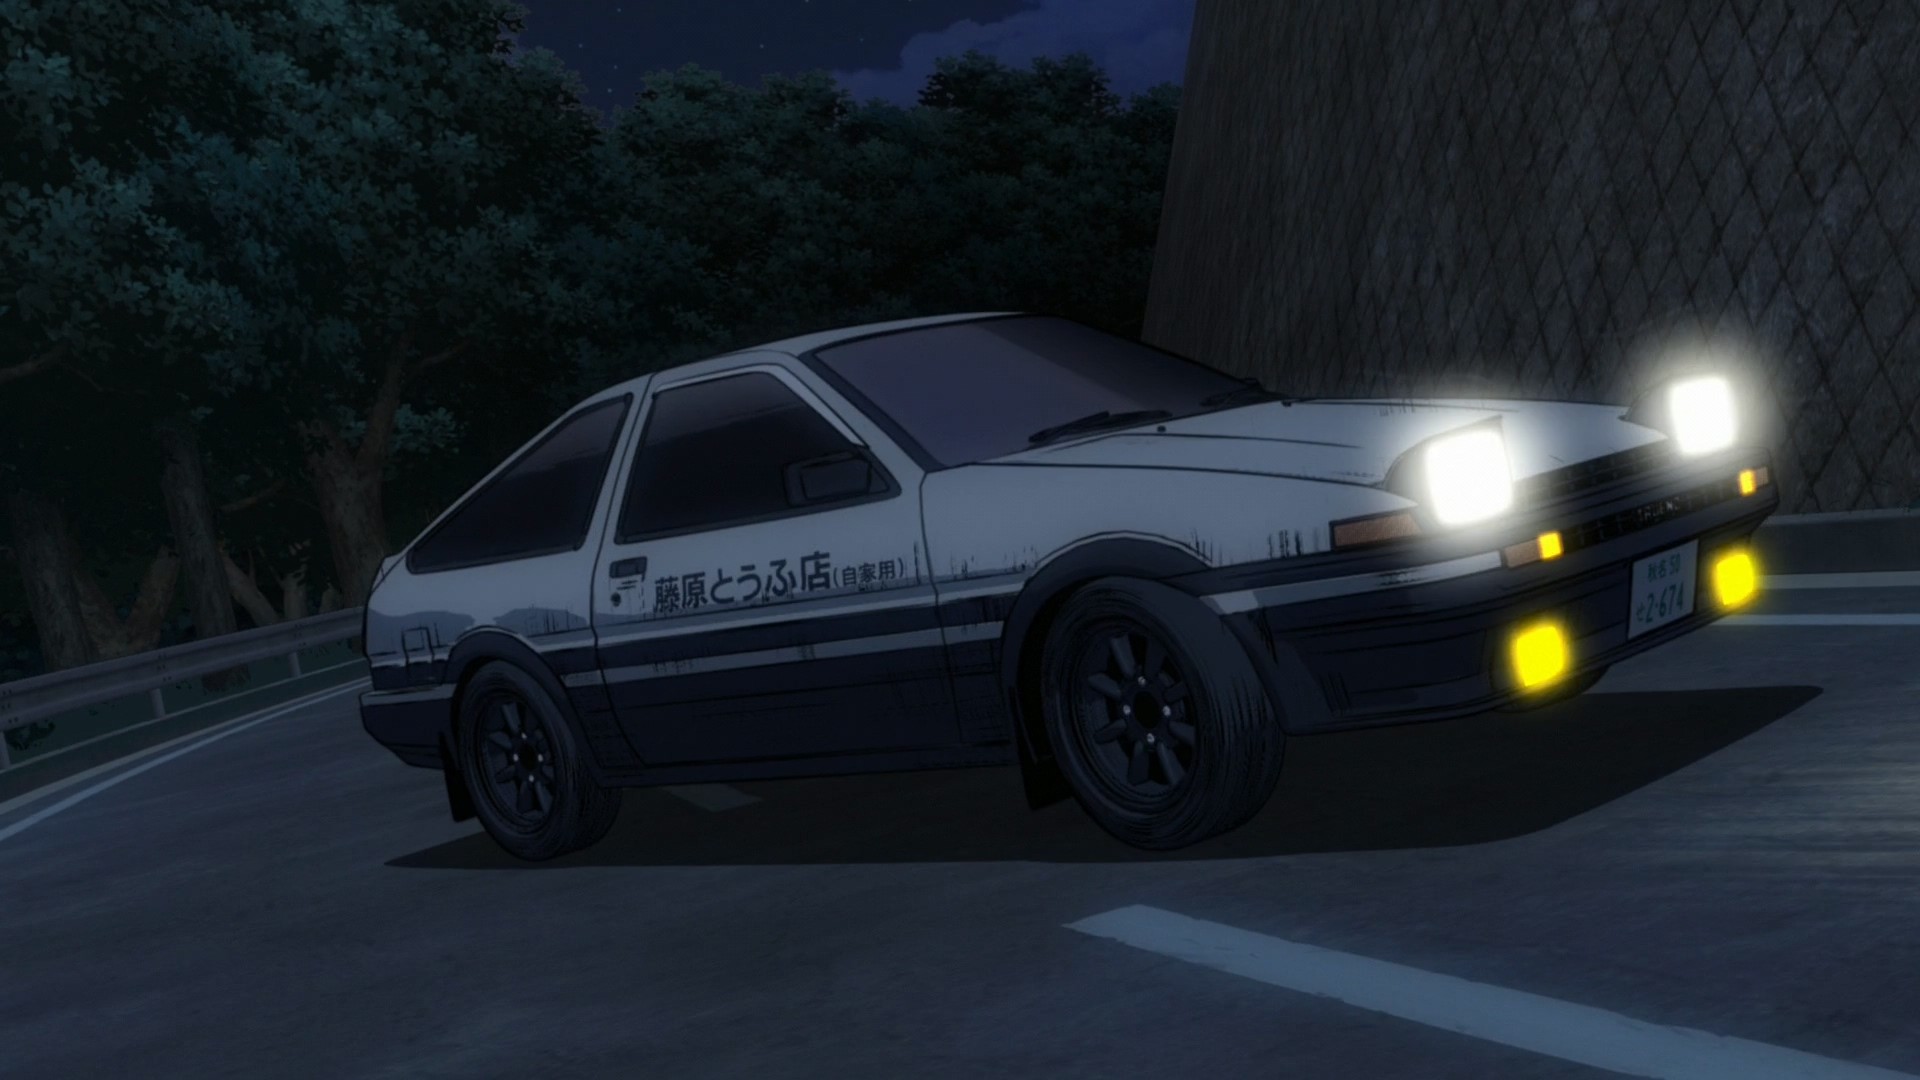 1920x1080 I screengrabbed the Initial D Movie for wallpapers, here they are : initiald